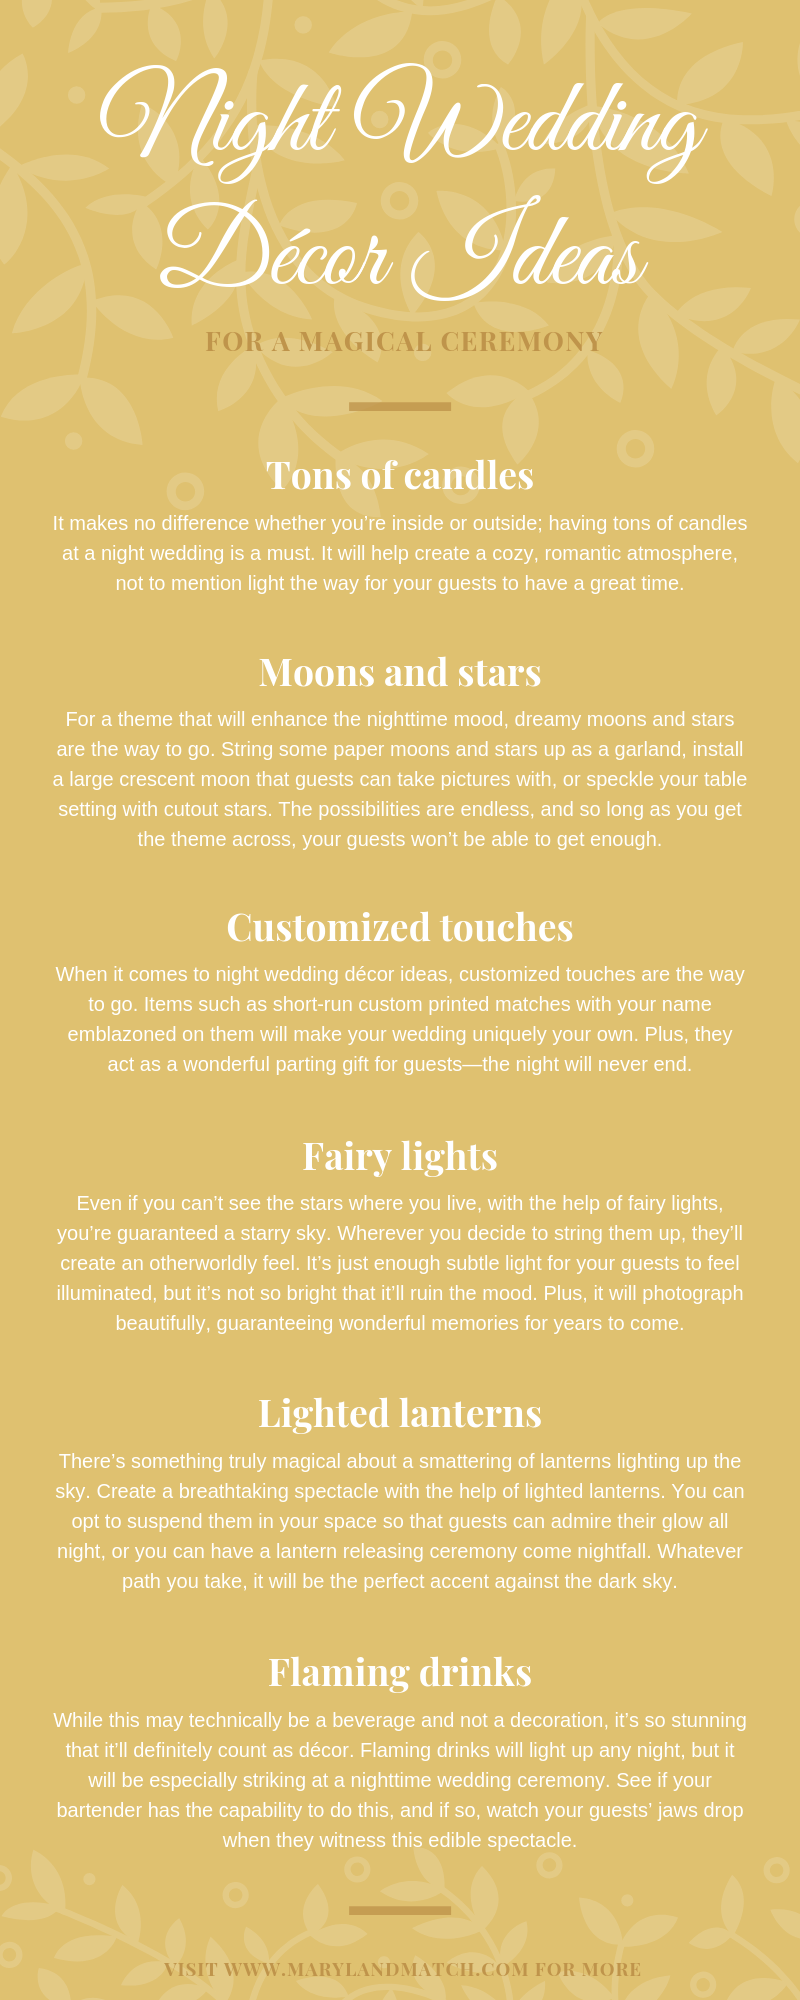 Night Wedding Décor Ideas for a Magical Ceremony infographic